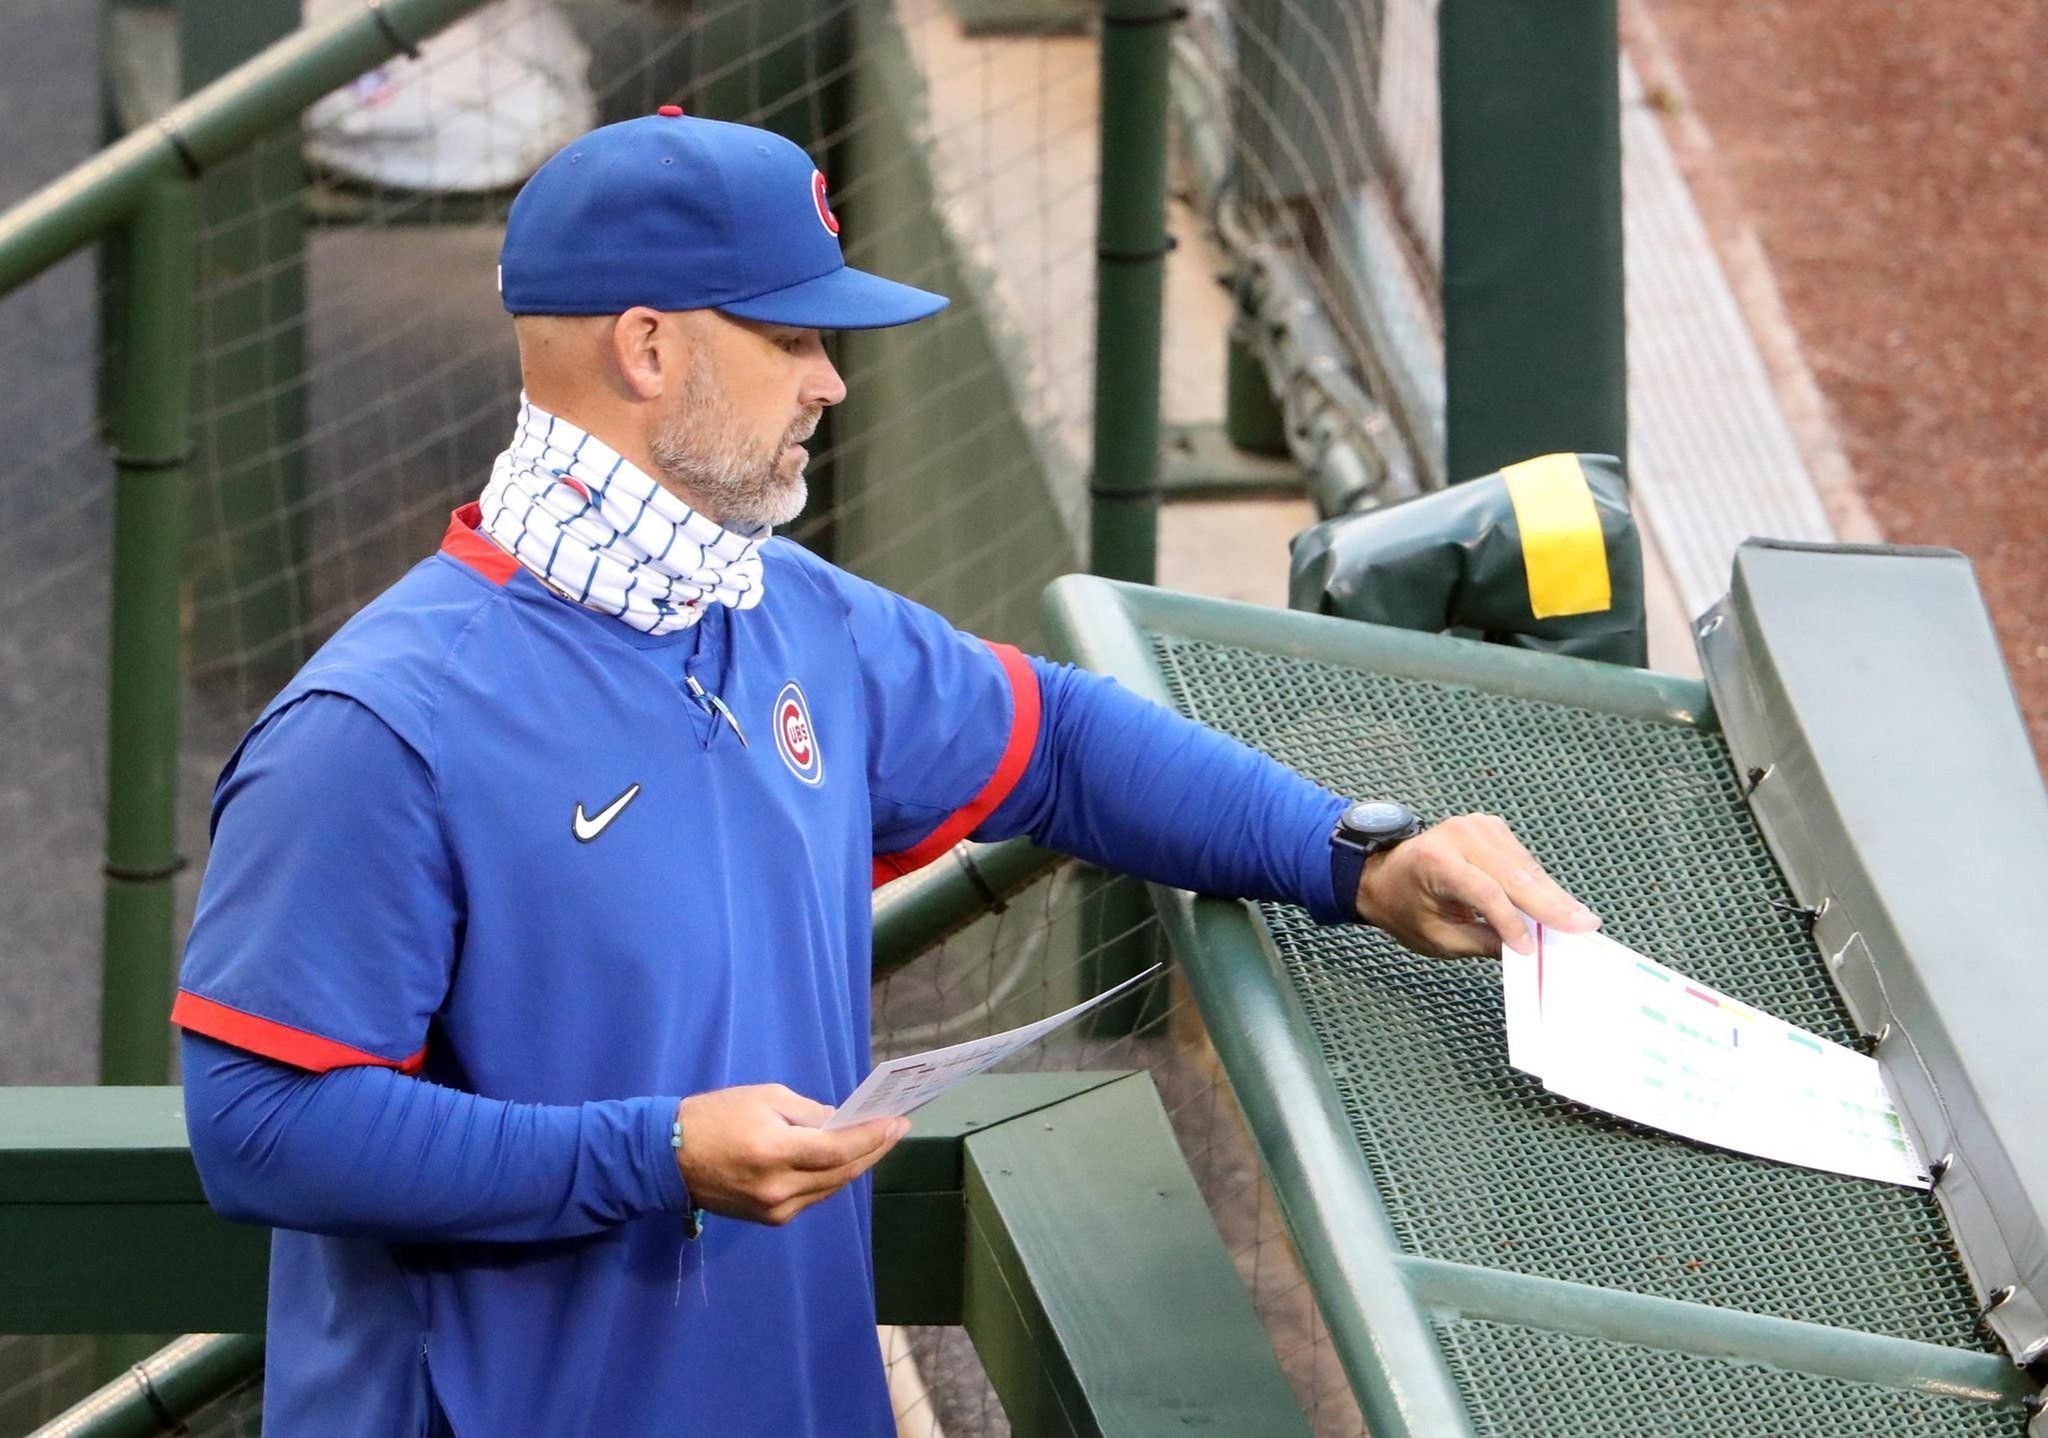 Ross says he was 'a little too patient' in his 1st year as Cubs' manager